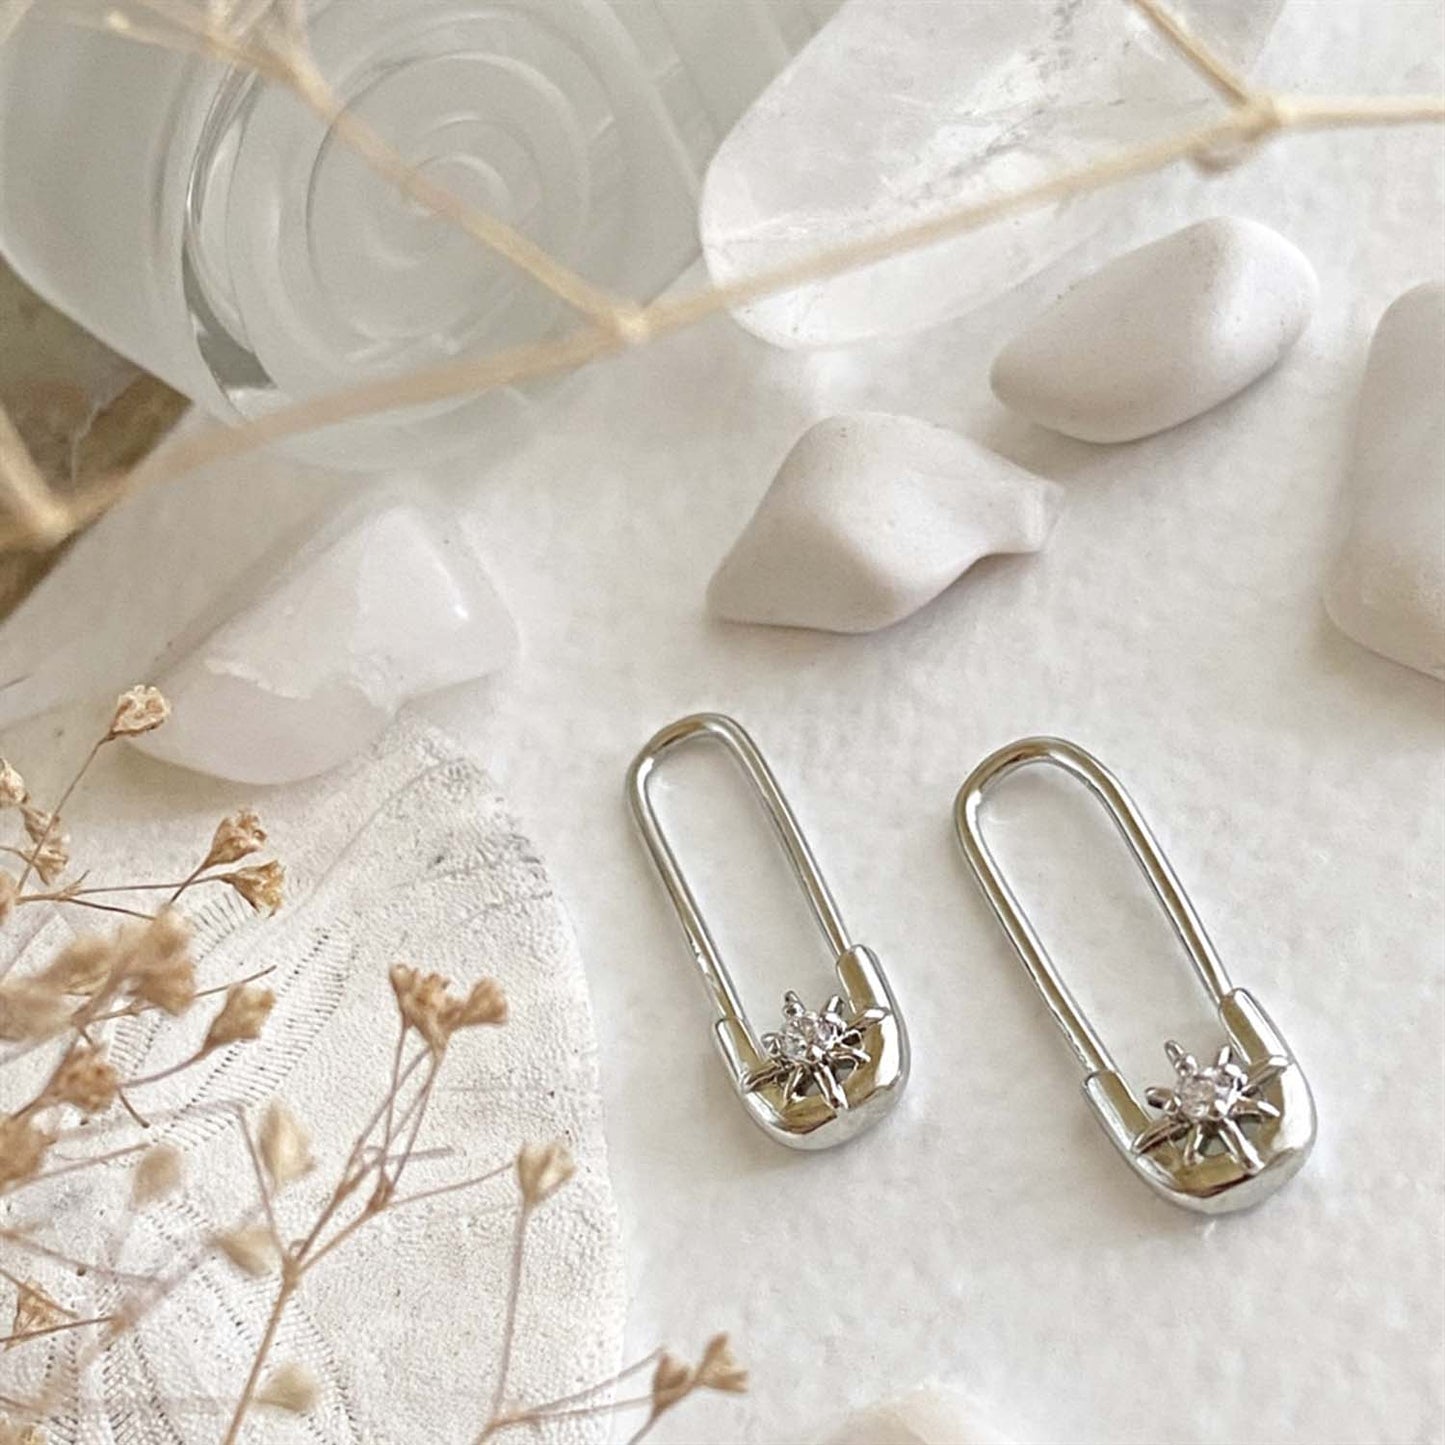 Walter Star Studded Safety Pin Style Earrings in Silver